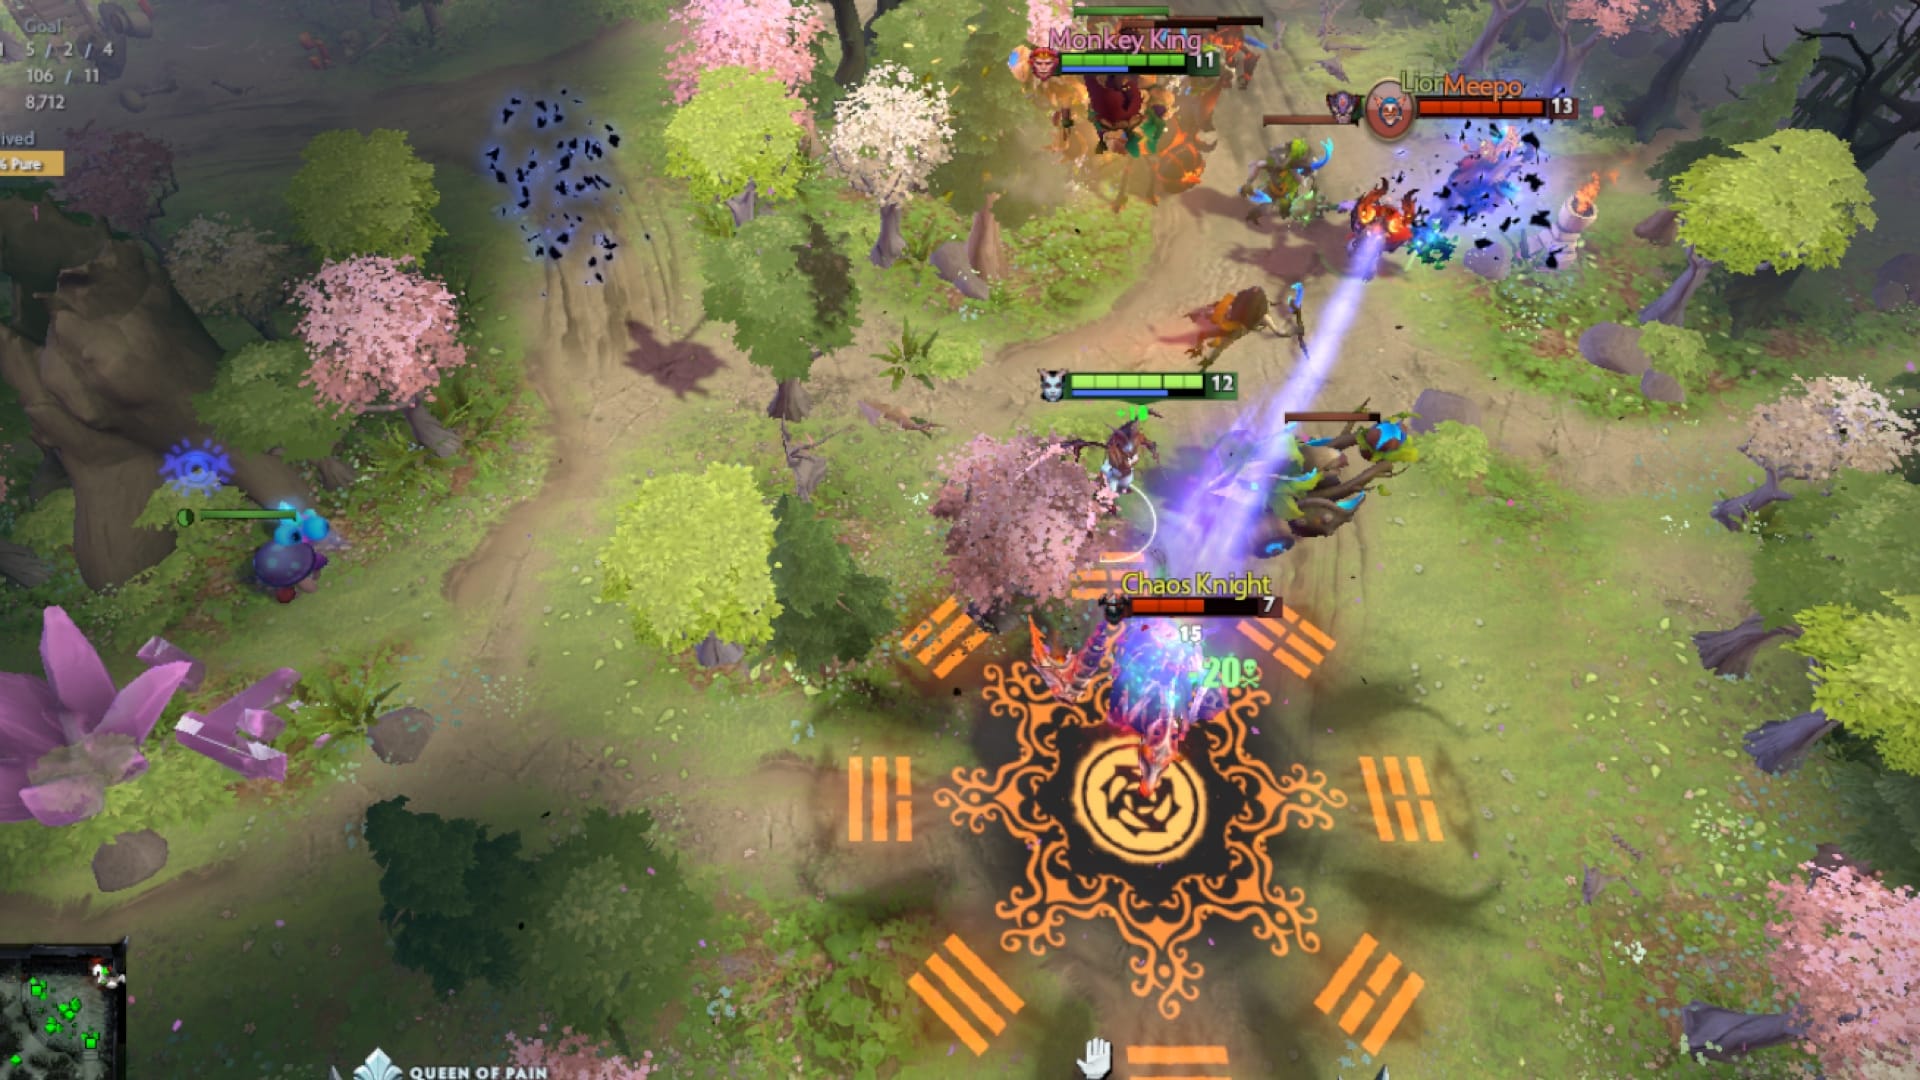 Queen of Pain slows enemies to fight them while Monkey King uses Tree Dance